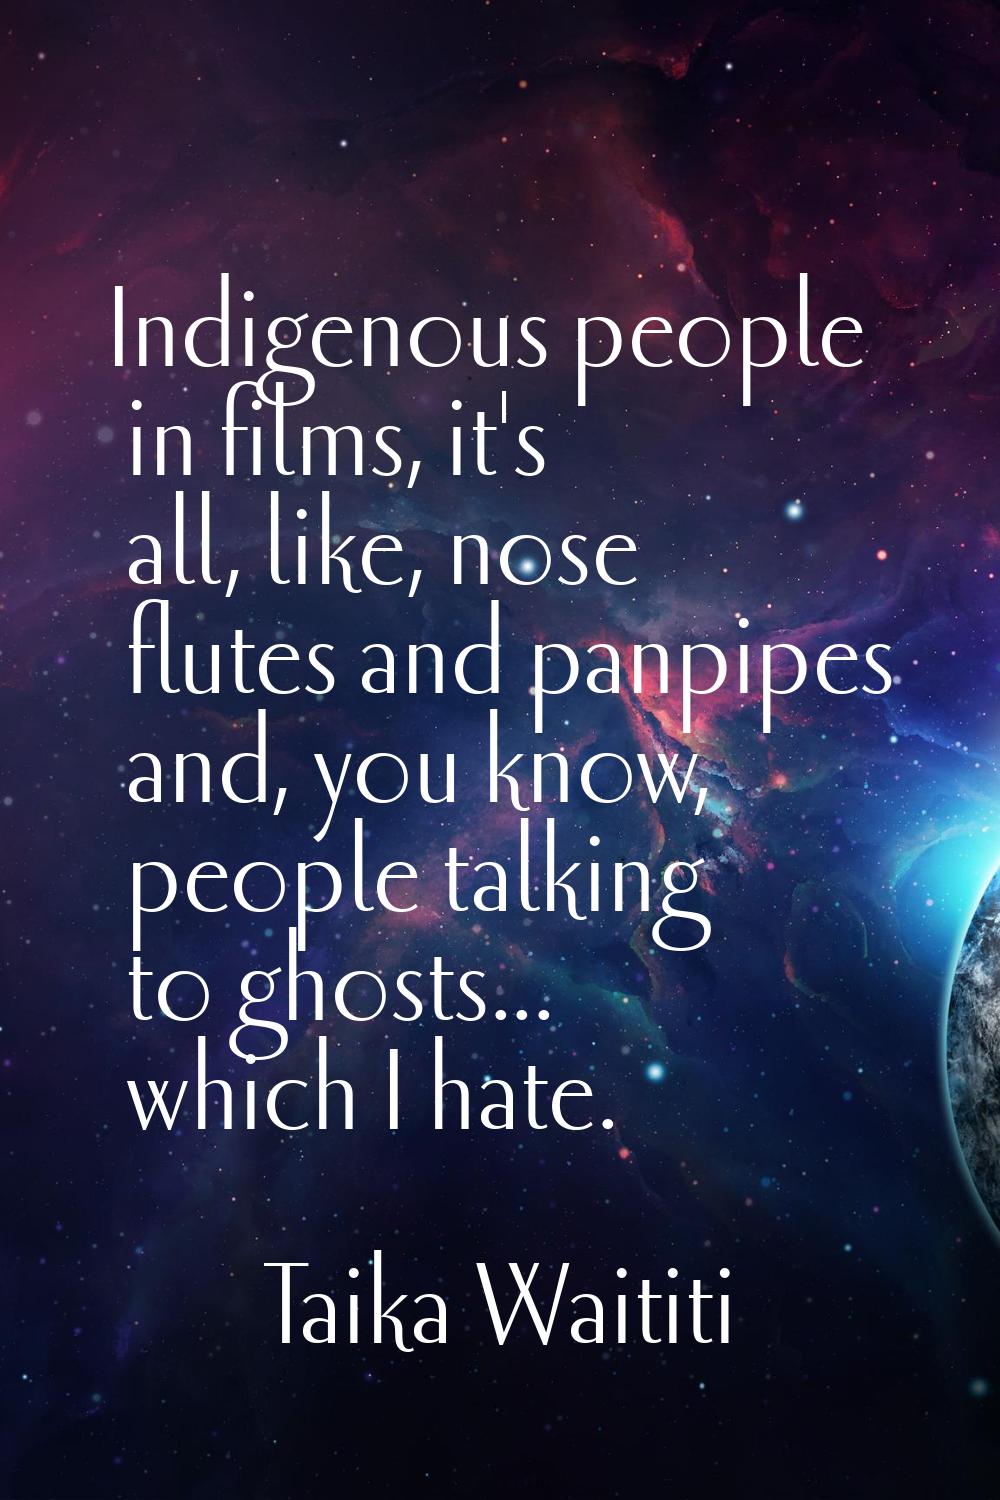 Indigenous people in films, it's all, like, nose flutes and panpipes and, you know, people talking 